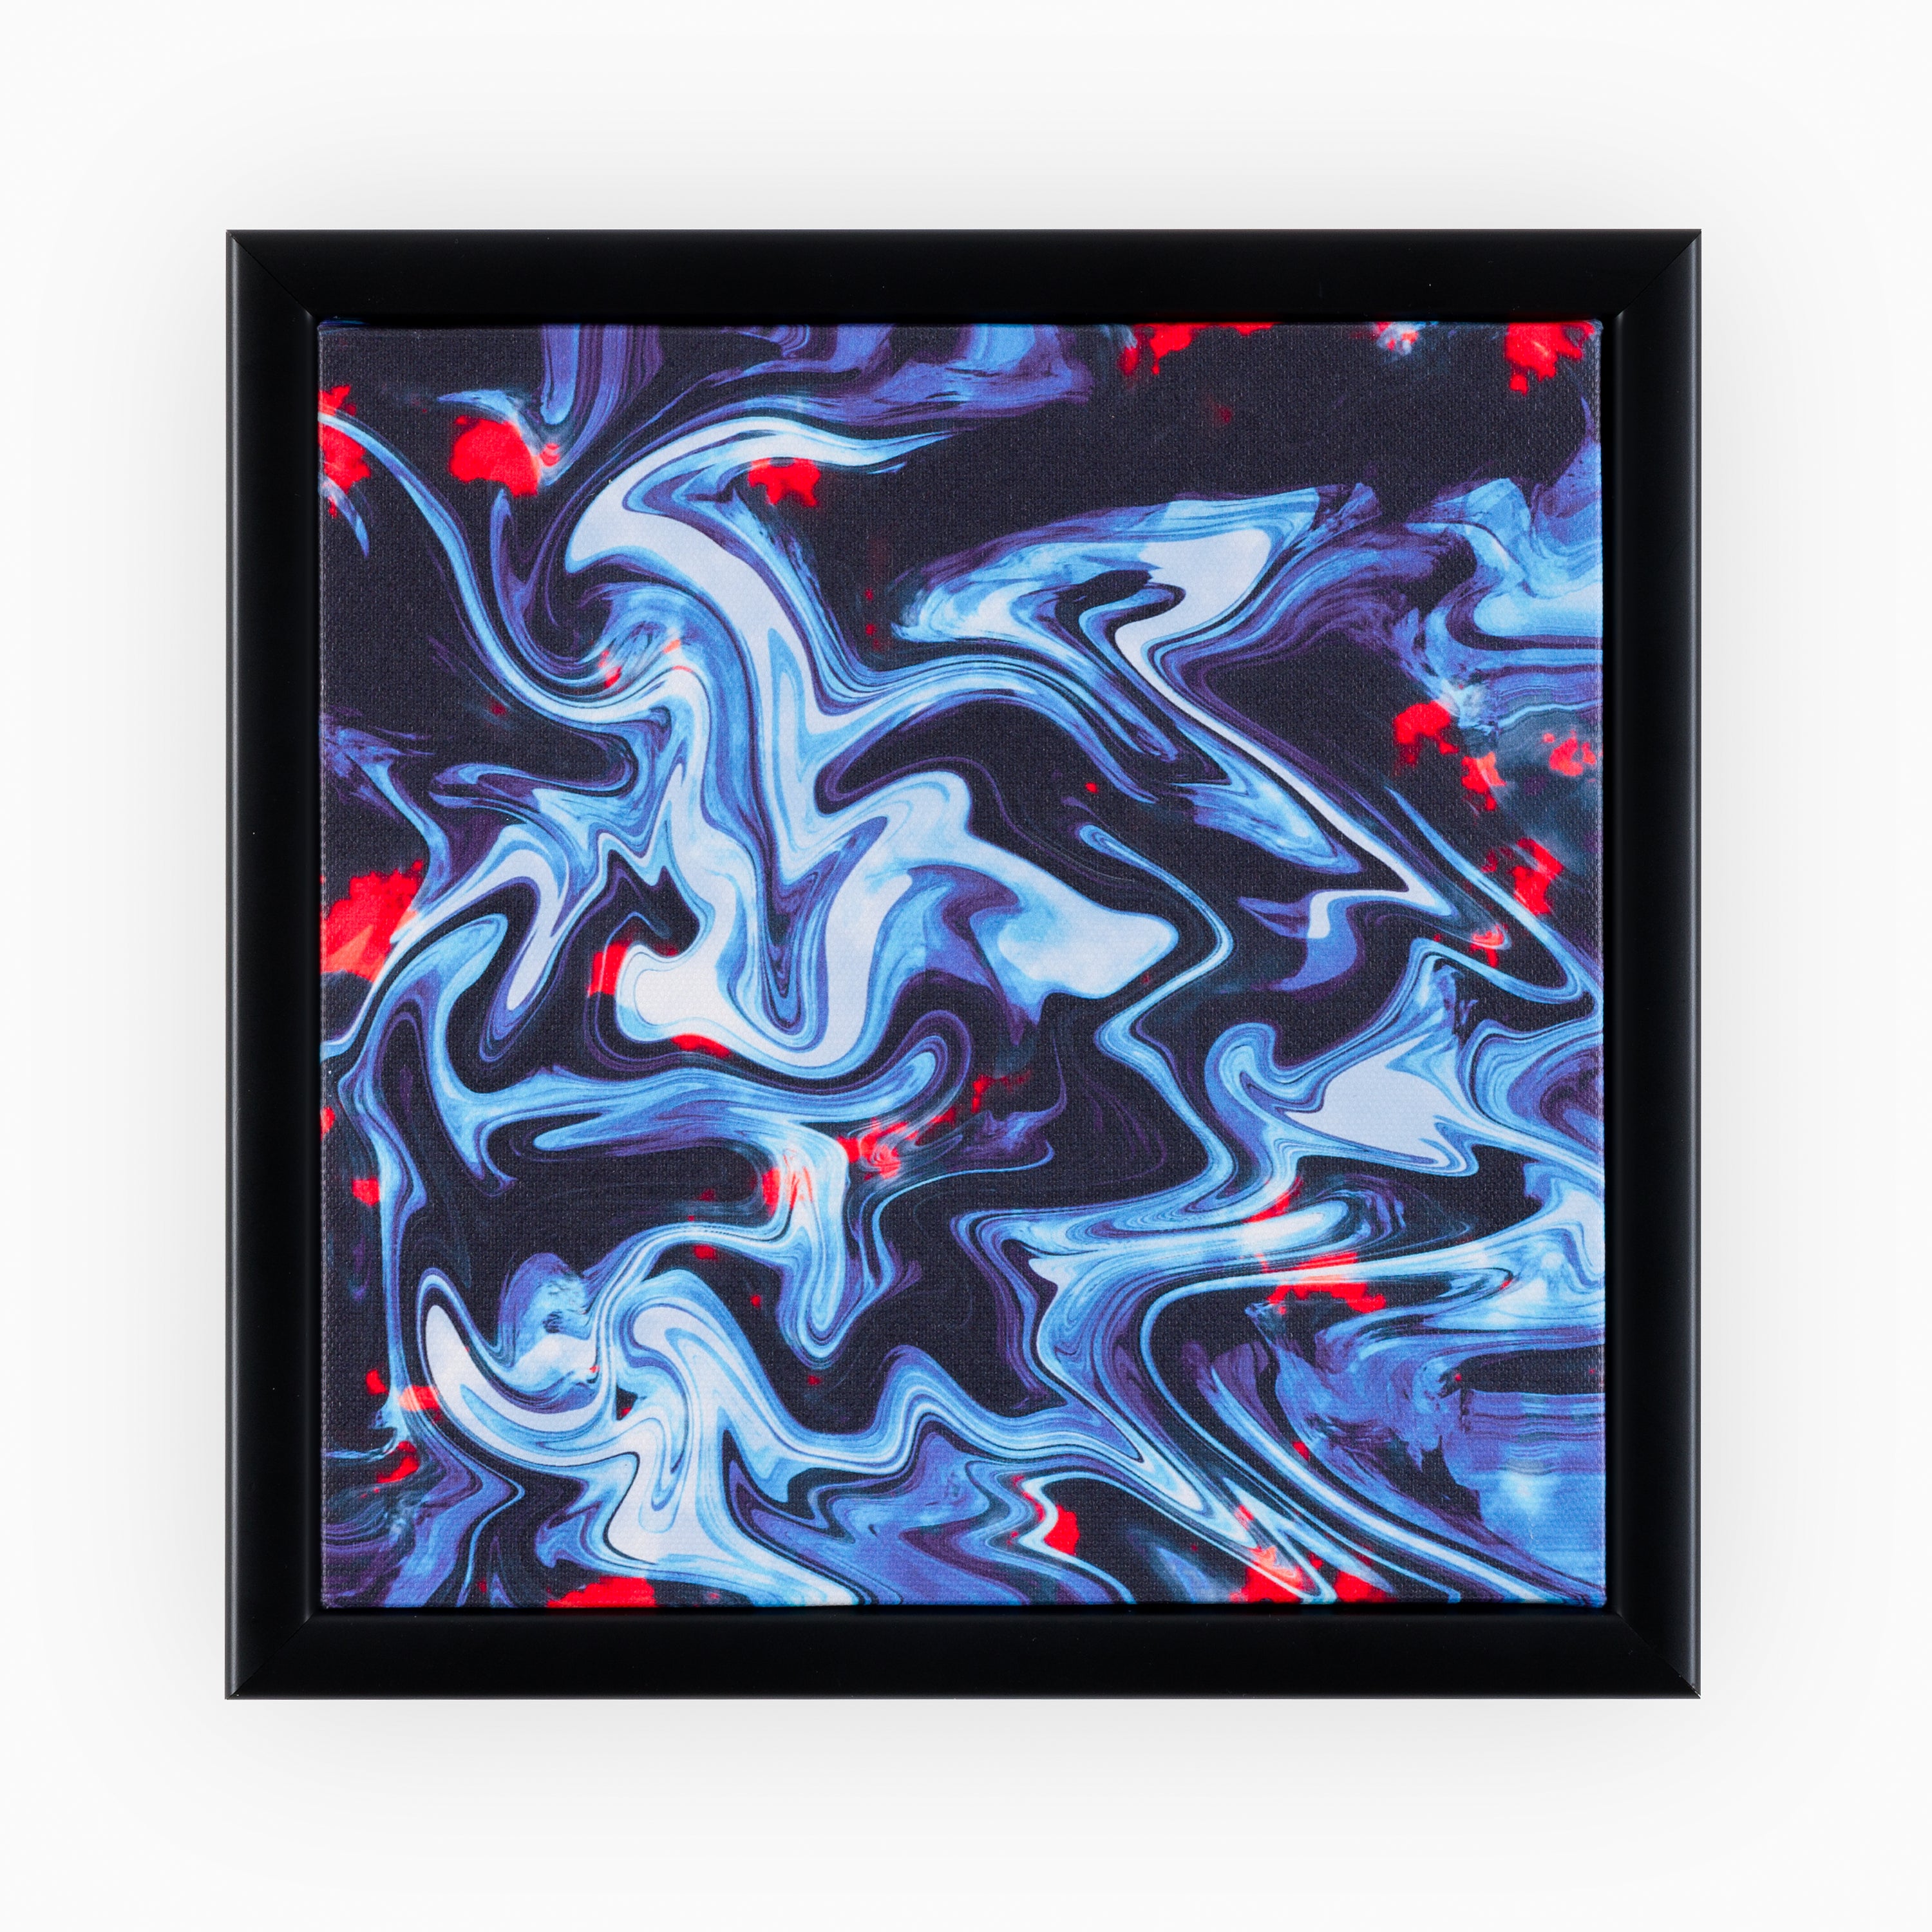 Luxury canvas print depicting the serene beauty of a deep blue sea with the subtle signs of koi fish. The art piece symbolises peace and serenity.